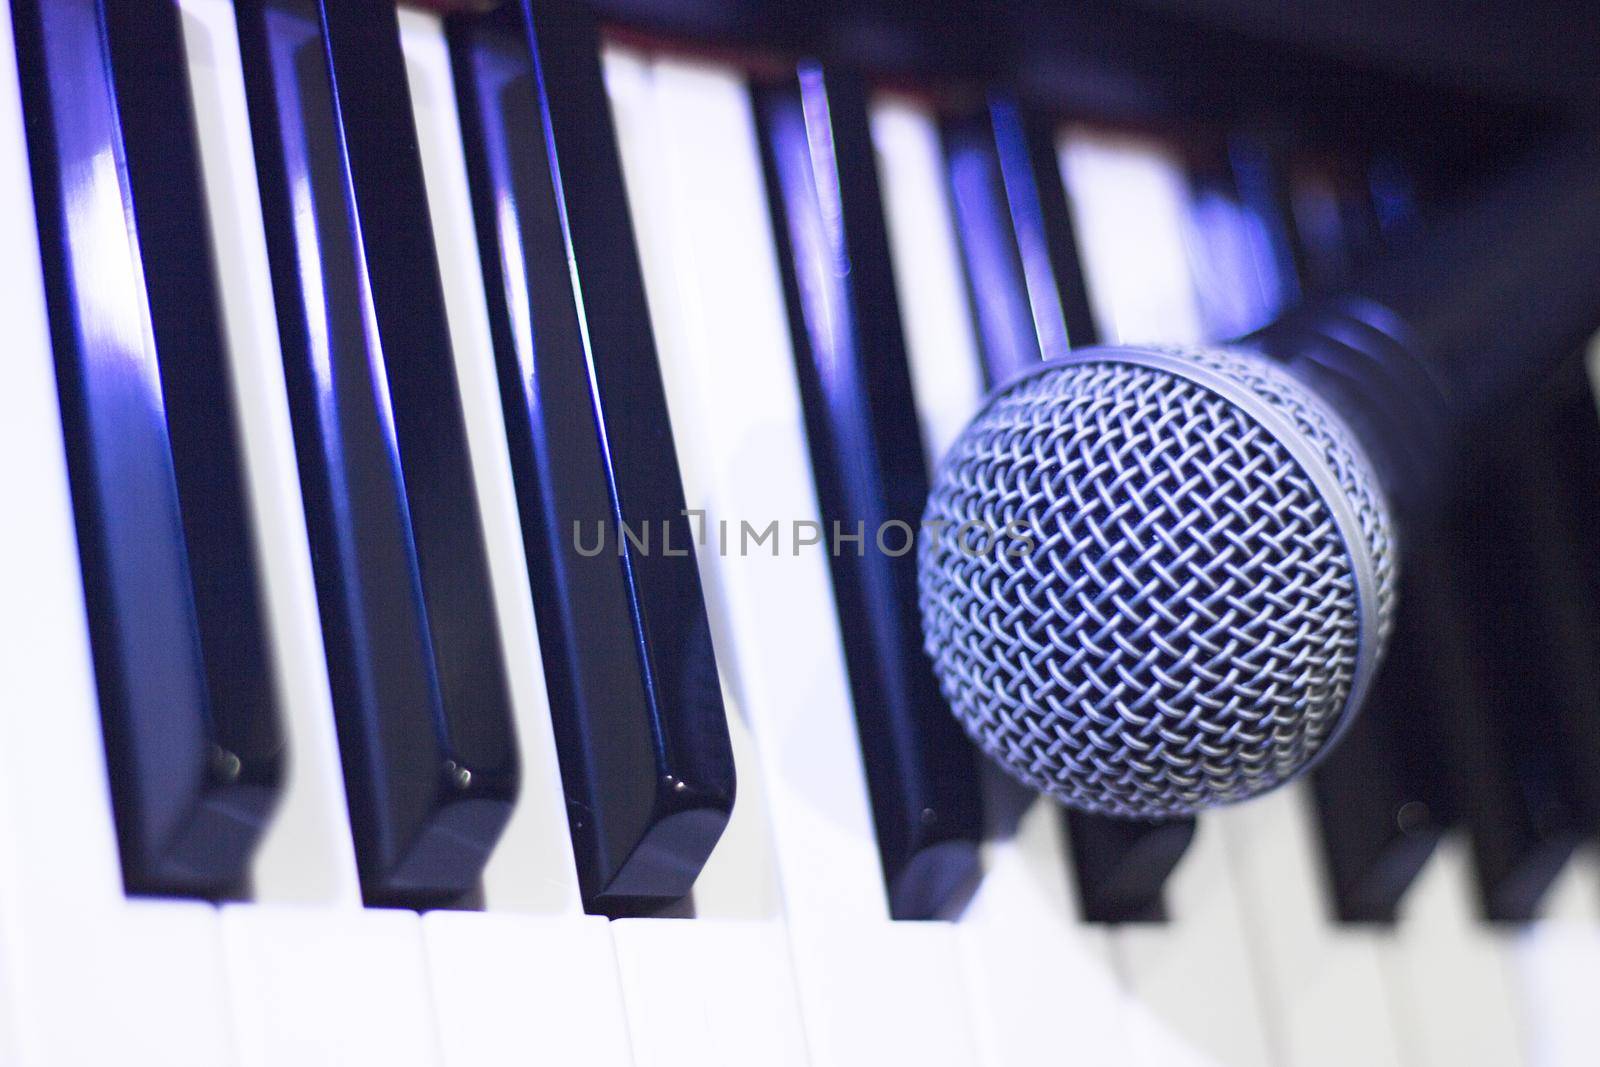 Microphone over piano keys in dim light by GemaIbarra